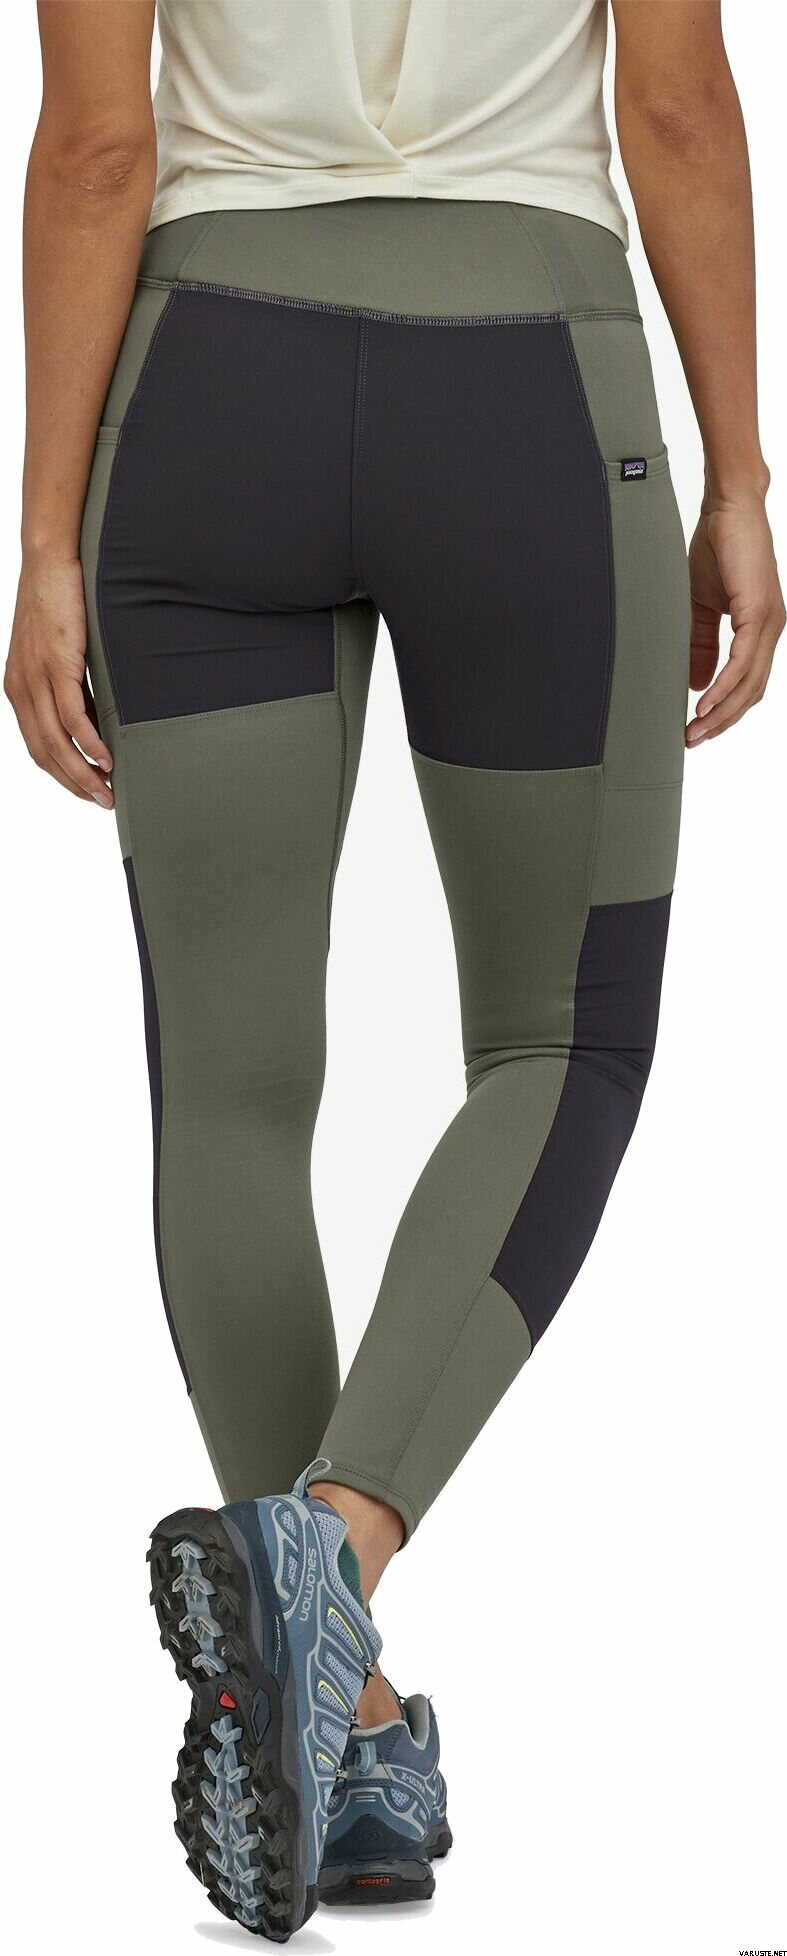 Patagonia Pack Out Hike Tights Womens, Women's Trekking Pants